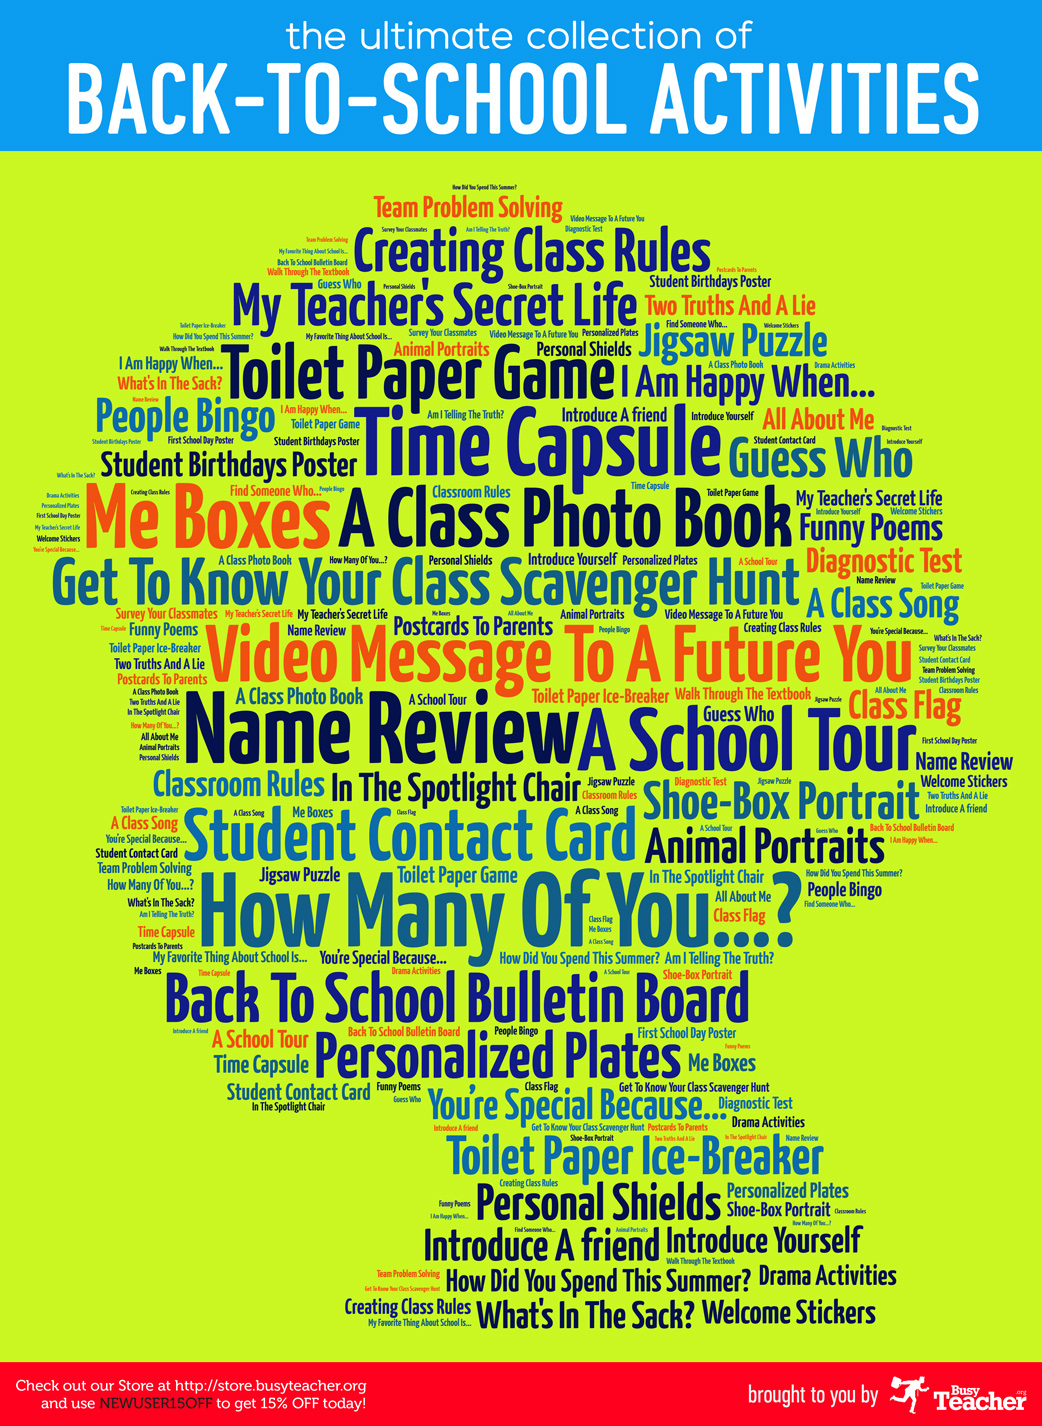 66 Free Classroom Posters - Free Printable Educational Posters